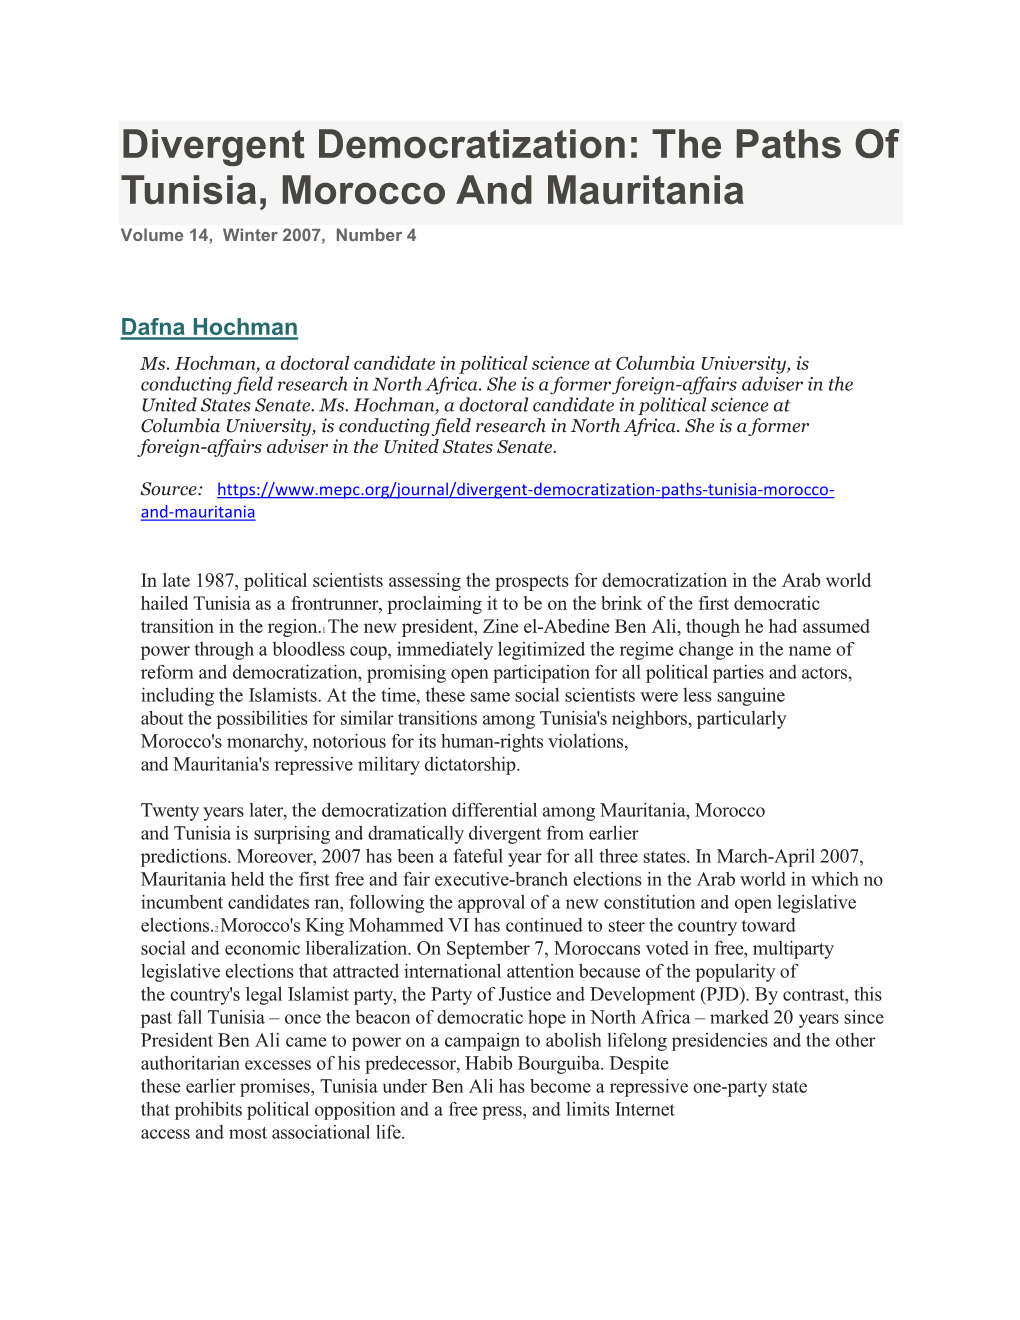 Divergent Democratization: the Paths of Tunisia, Morocco and Mauritania Volume 14, Winter 2007, Number 4